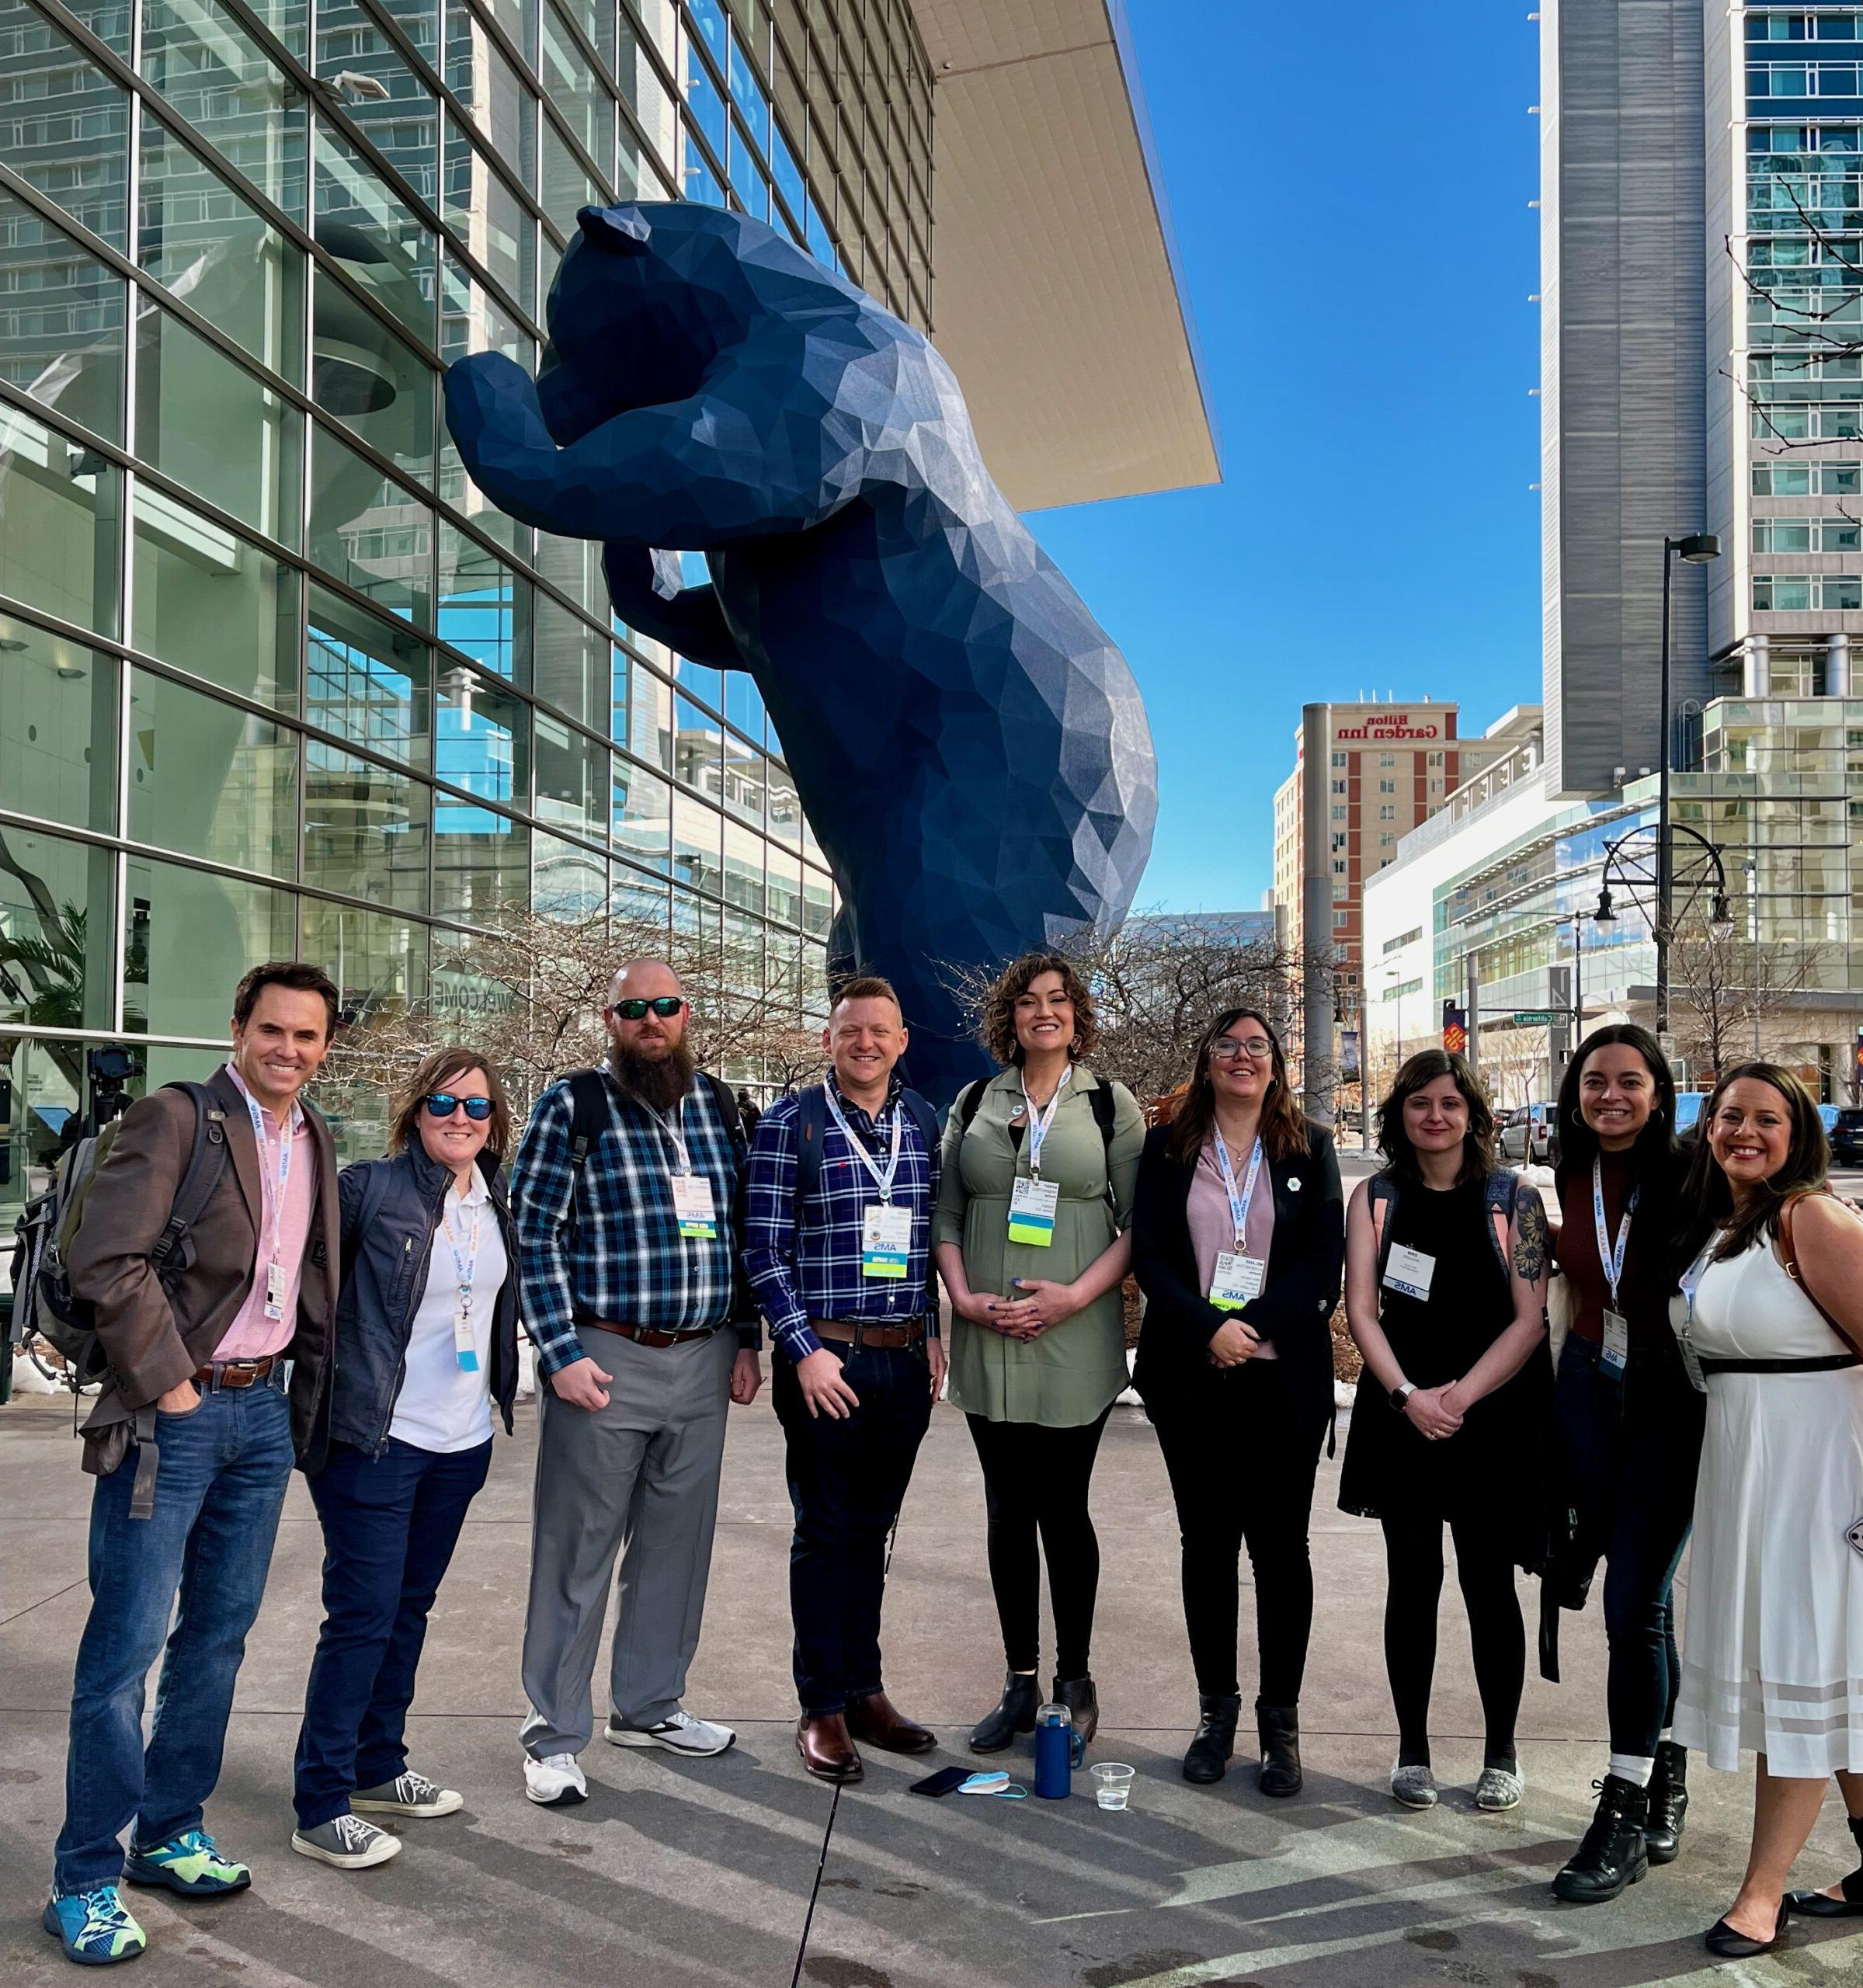 Students at the Denver Convention Center for the AMS conference